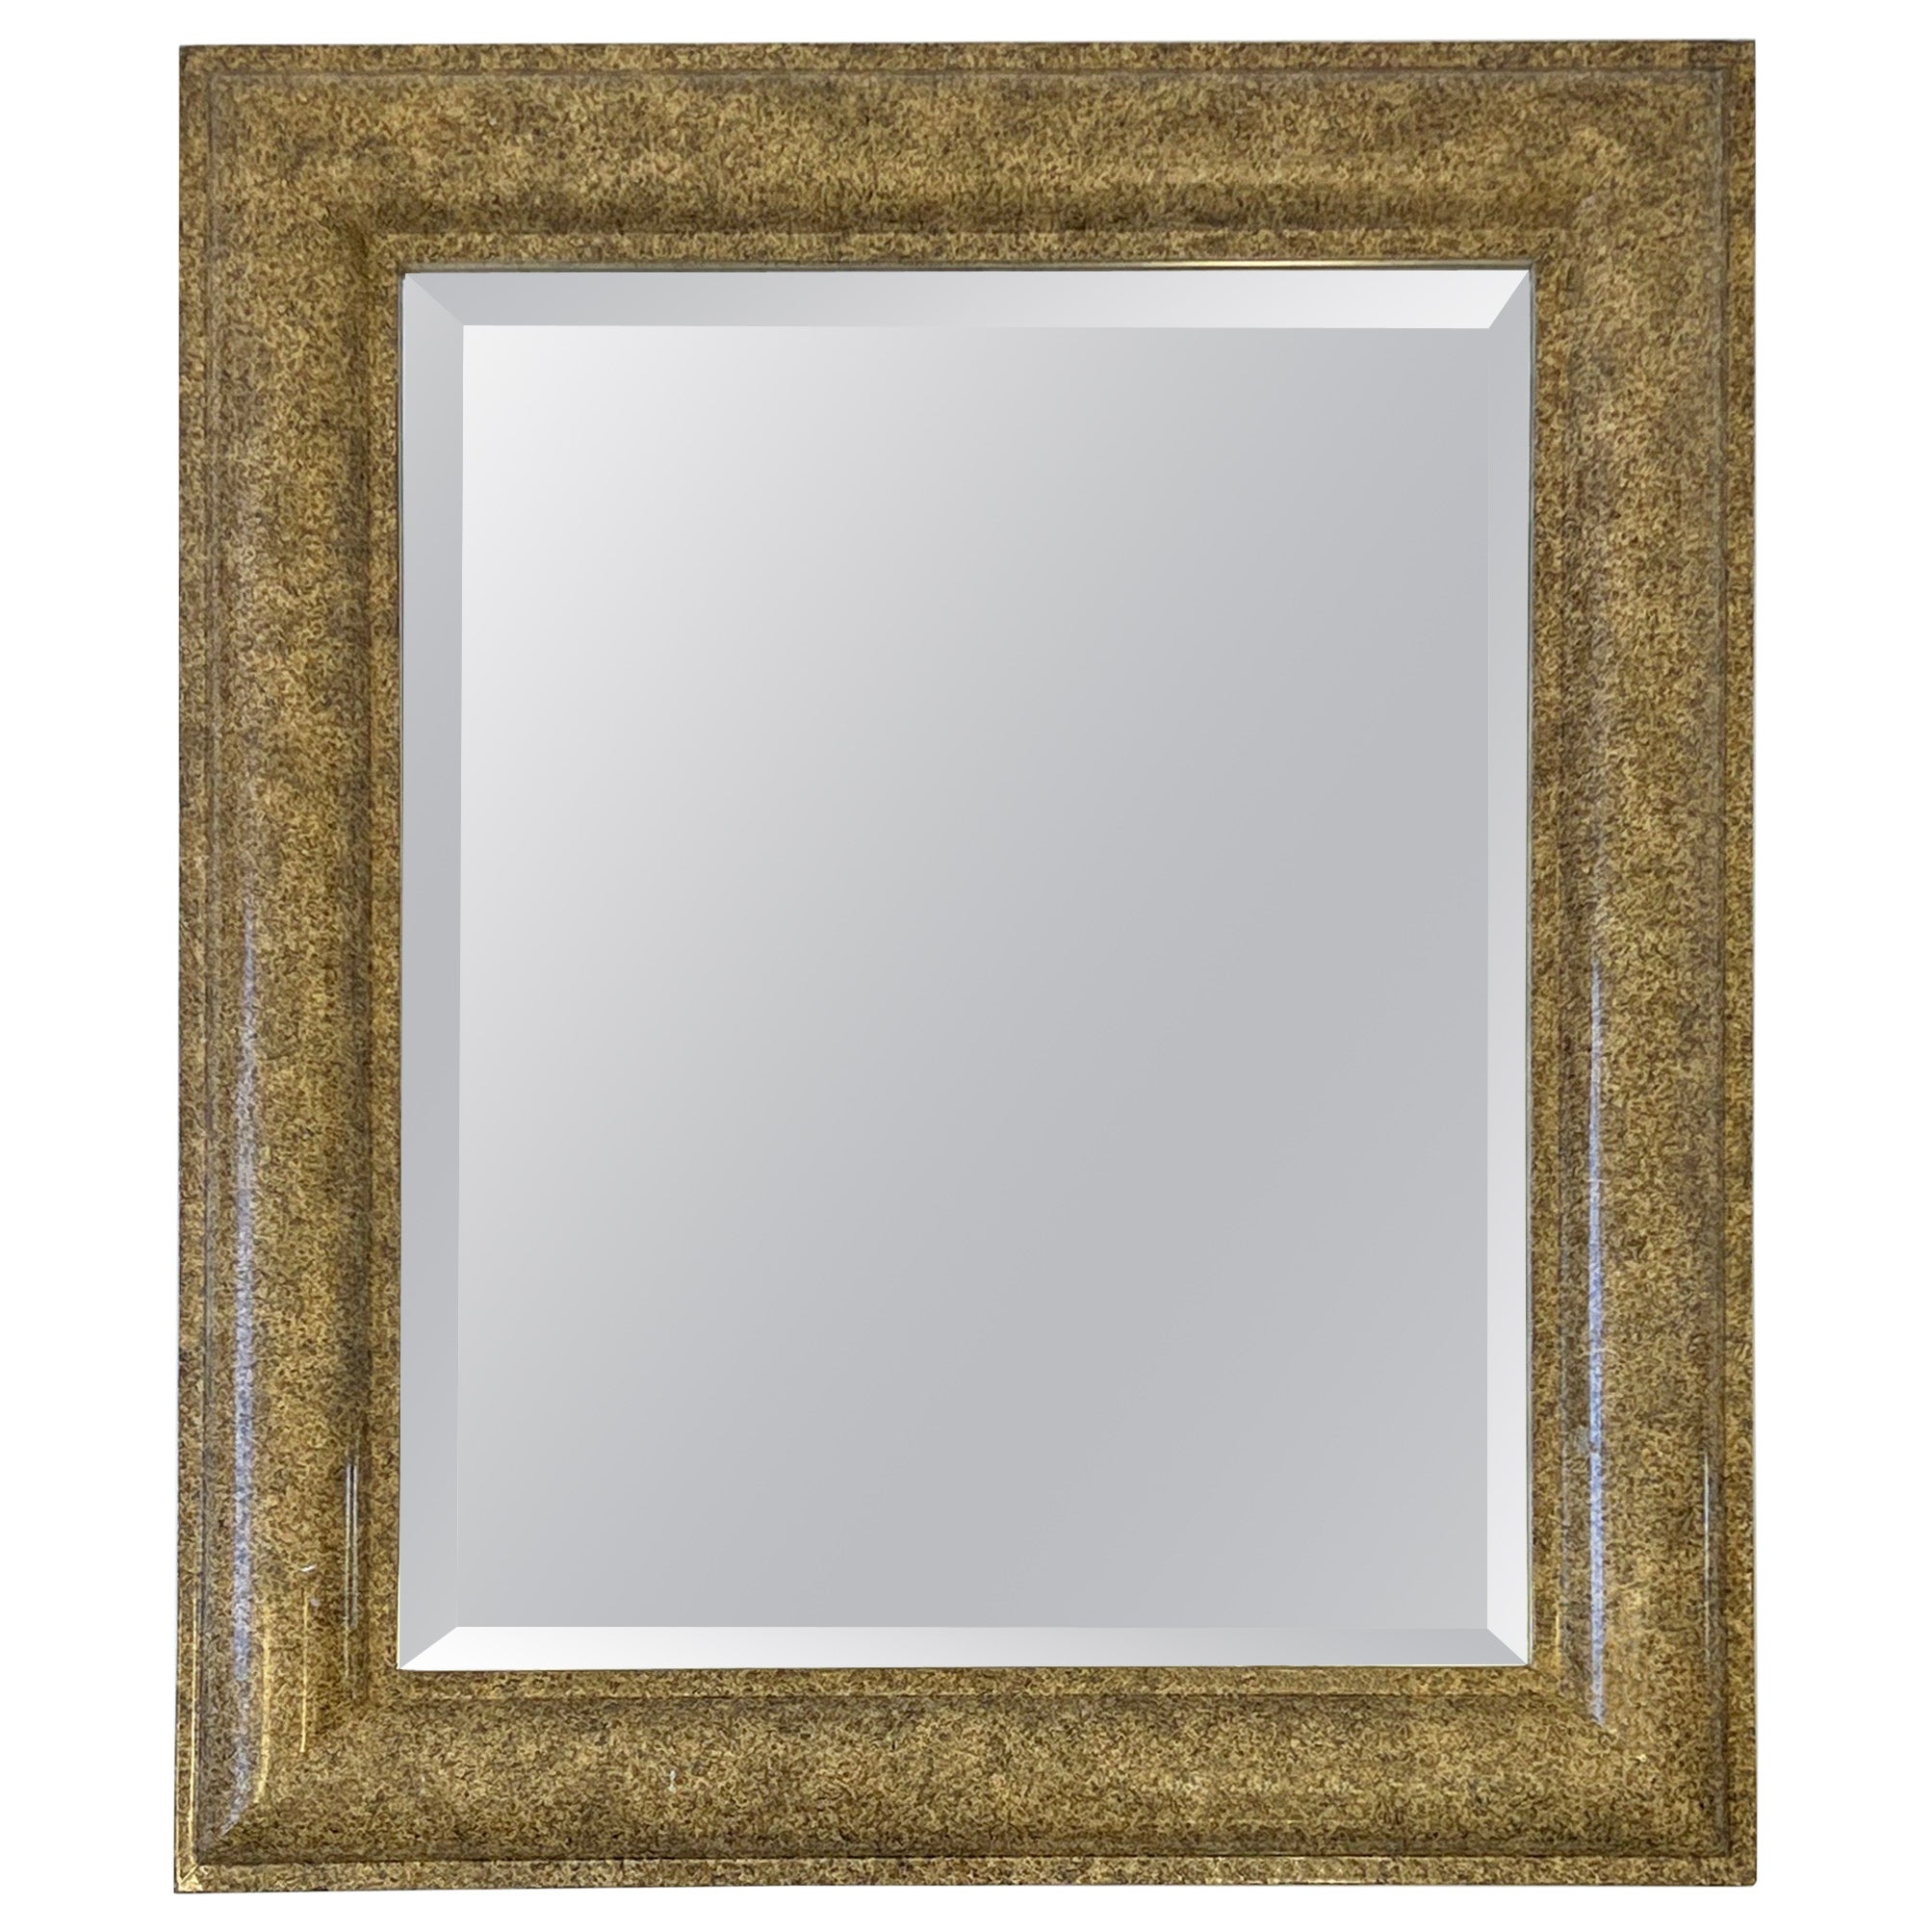 Faux Granite Lacquer Beveled Wall Mirror by J. Robert Scott